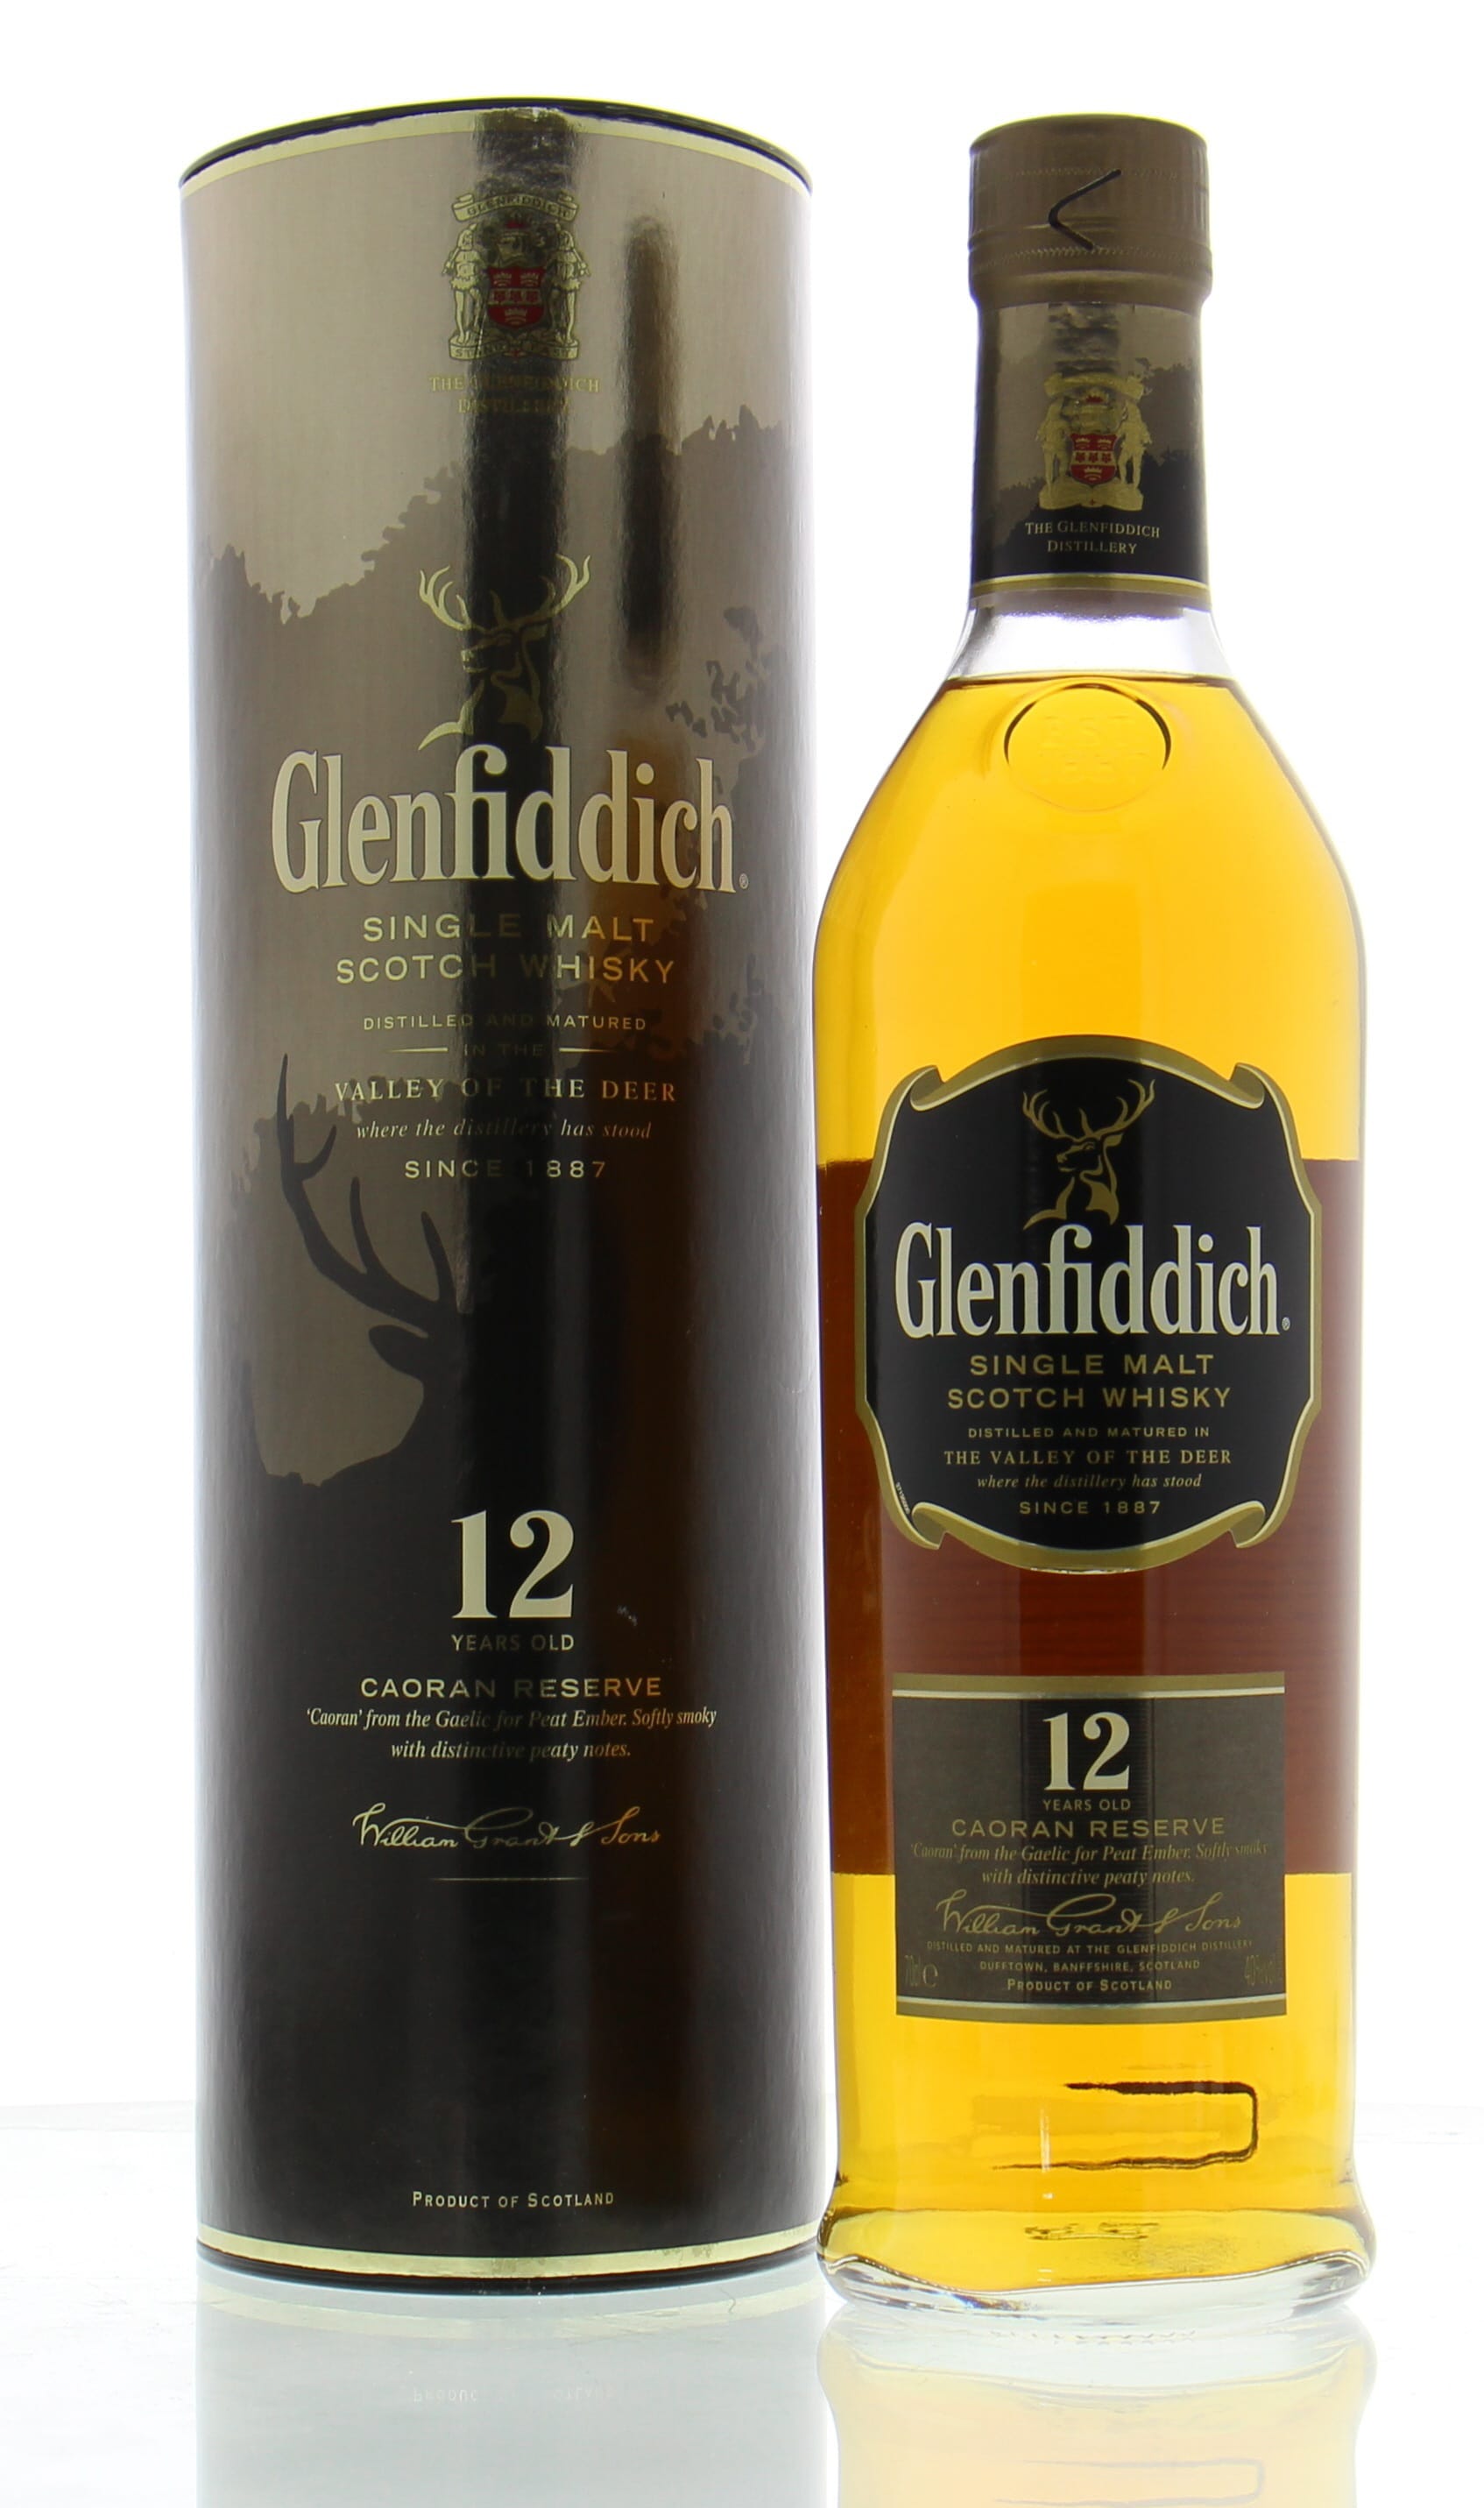 Glenfiddich - 12 Years Old Caoran Reserve New Label 40% NV